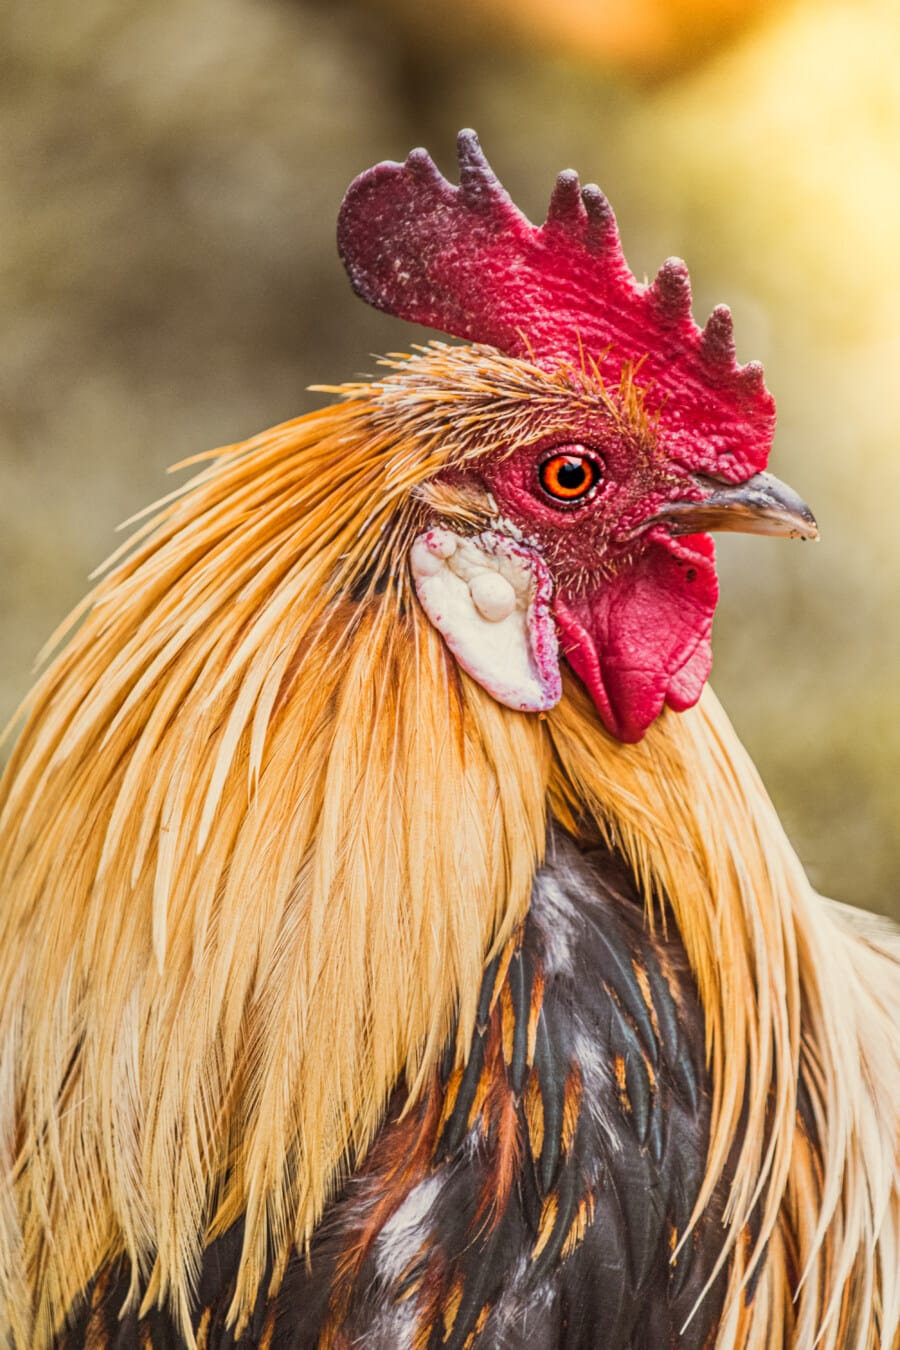 rooster, head, eye, close-up, crest, dark red, animal, domestic, nature, chicken